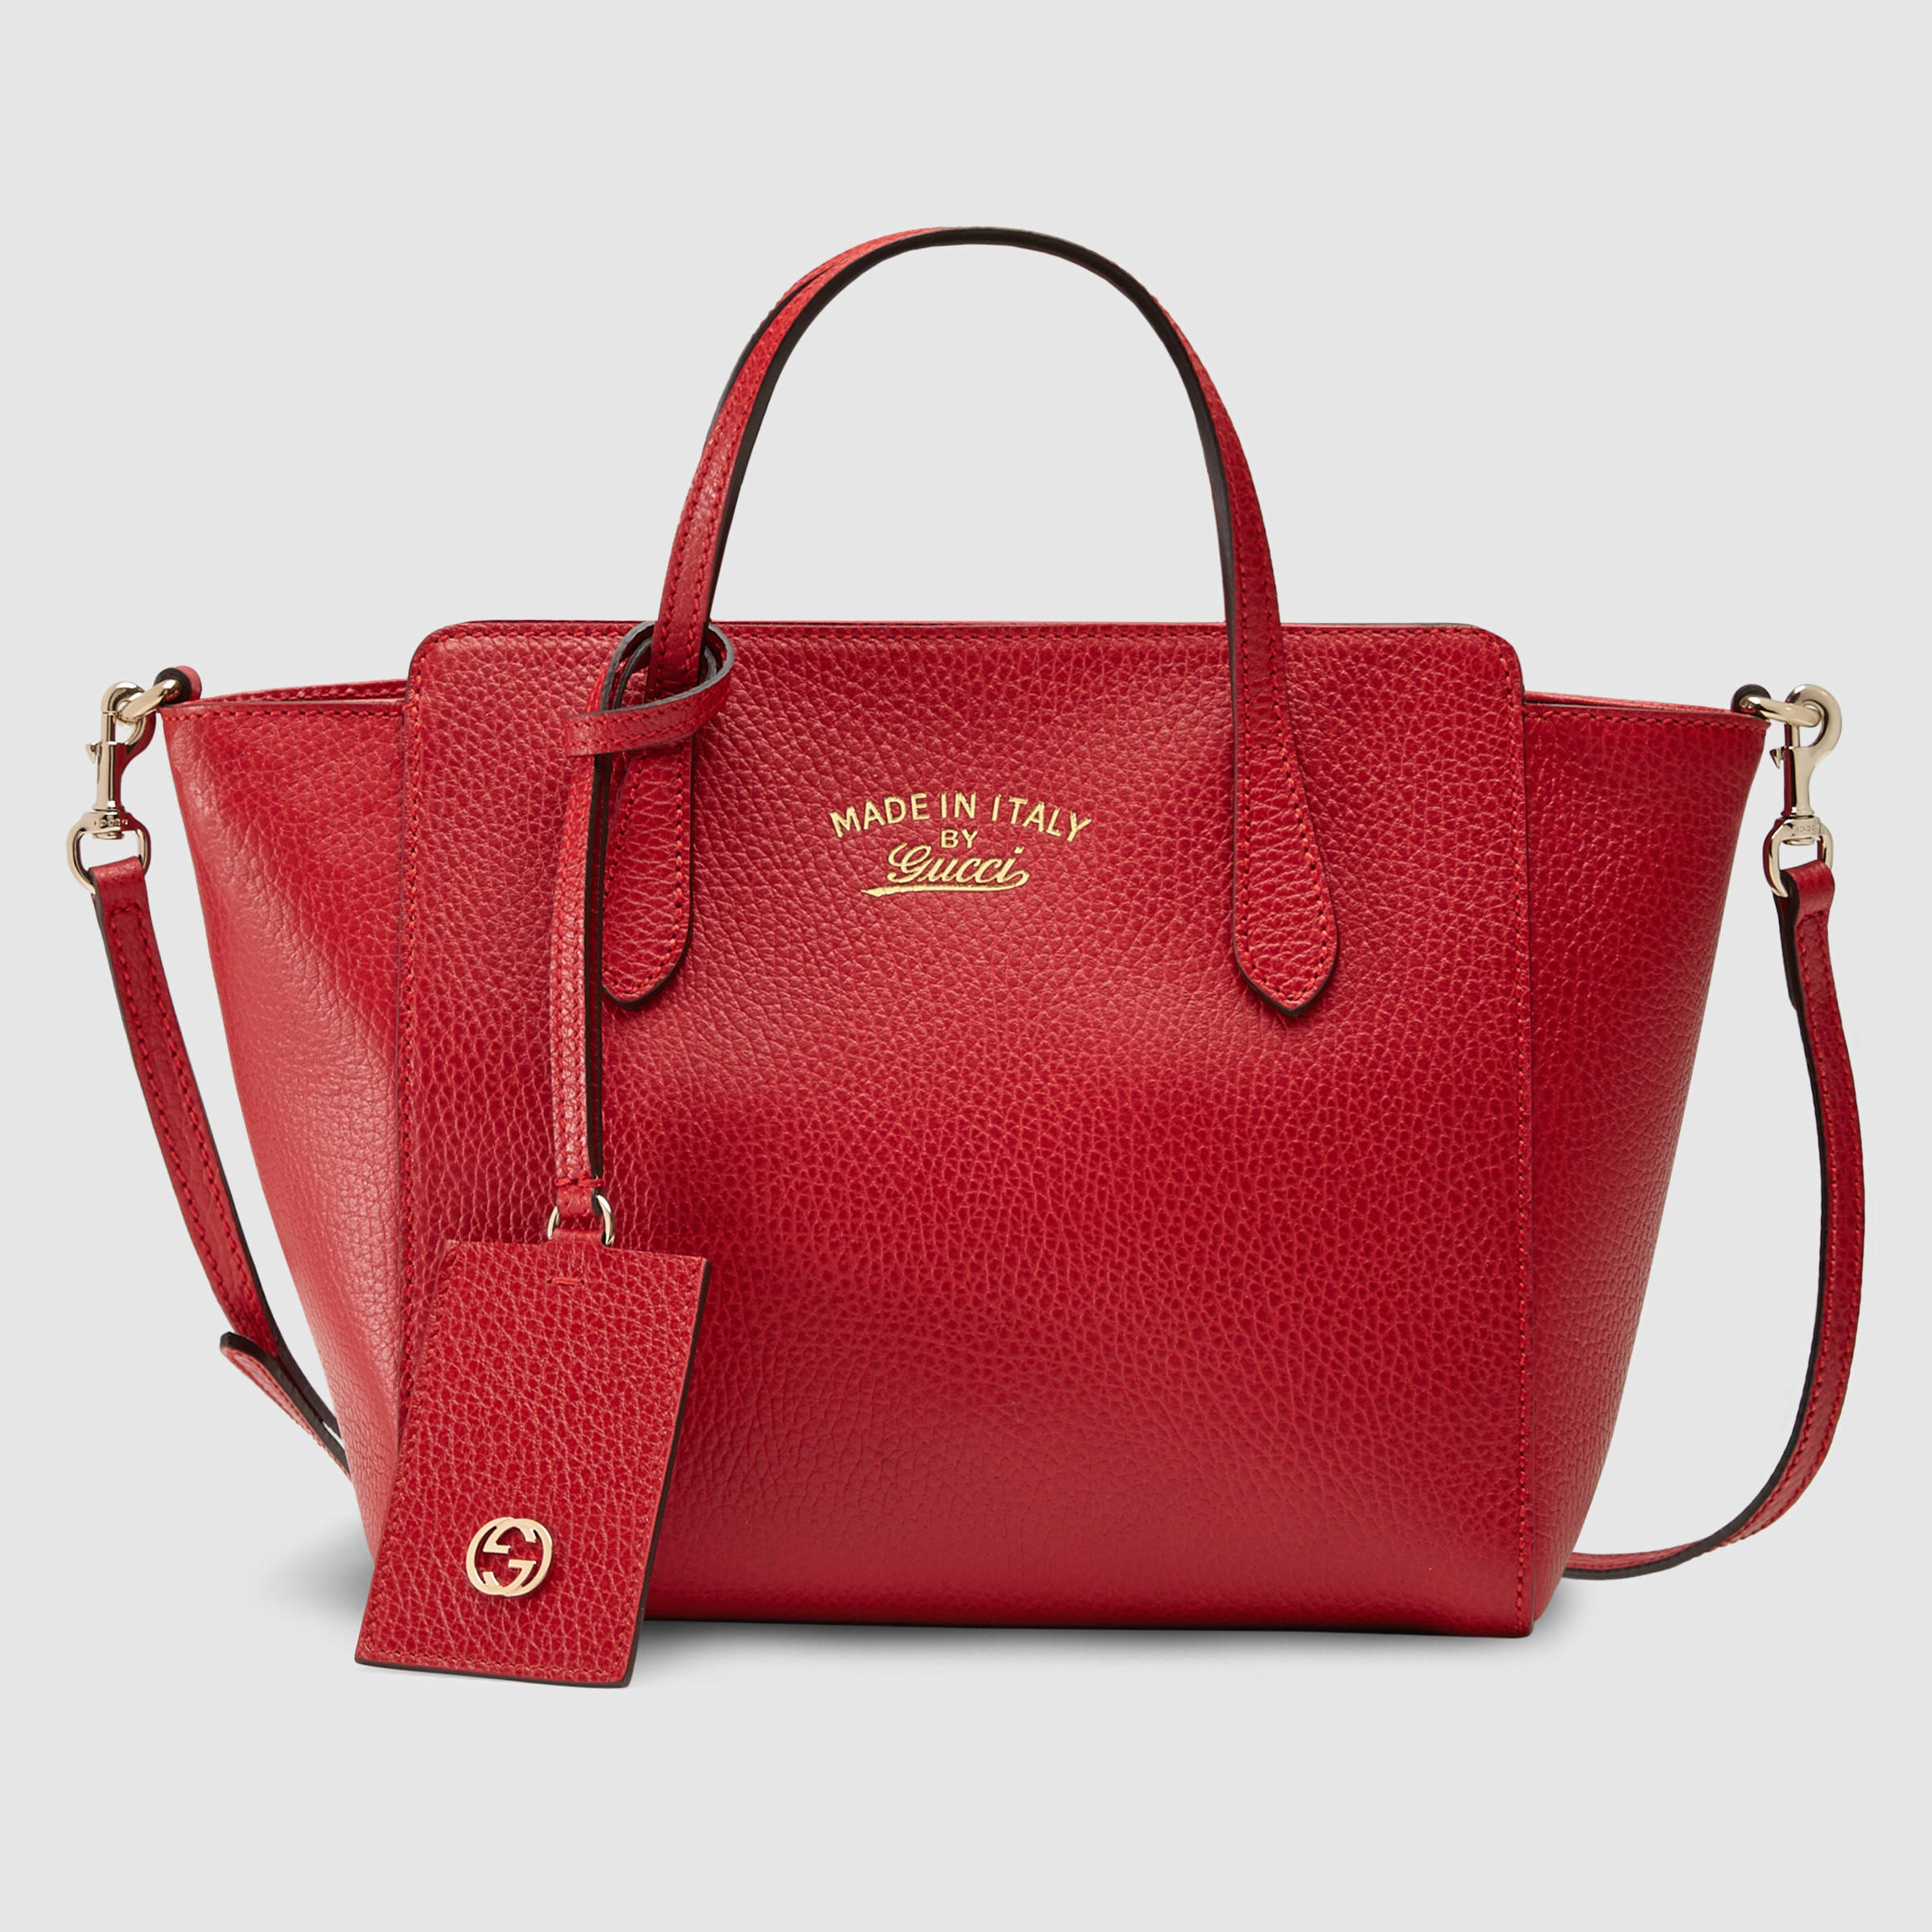 Gucci Swing Leather Mini Bag in Red (red leather) | Lyst